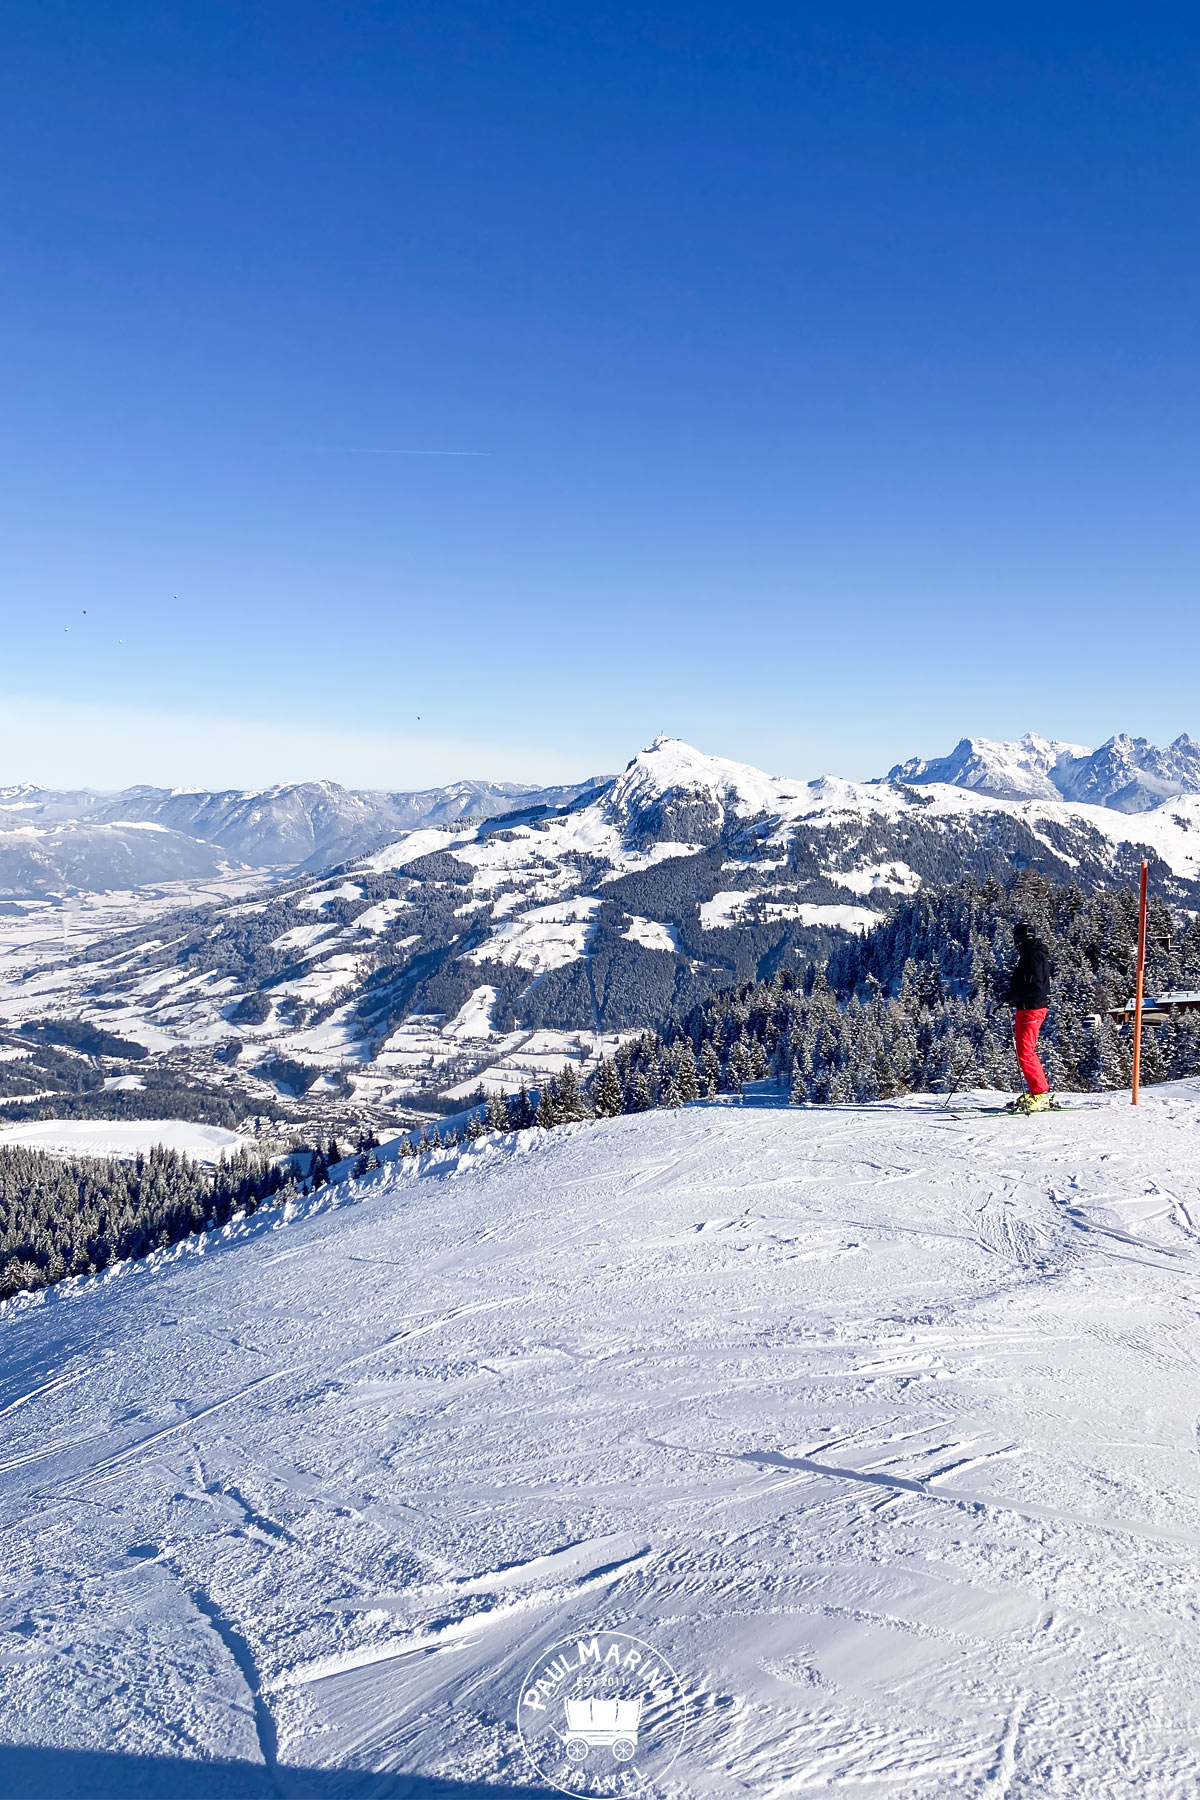 View of Kitzbühel and surrounding towns from the slopes